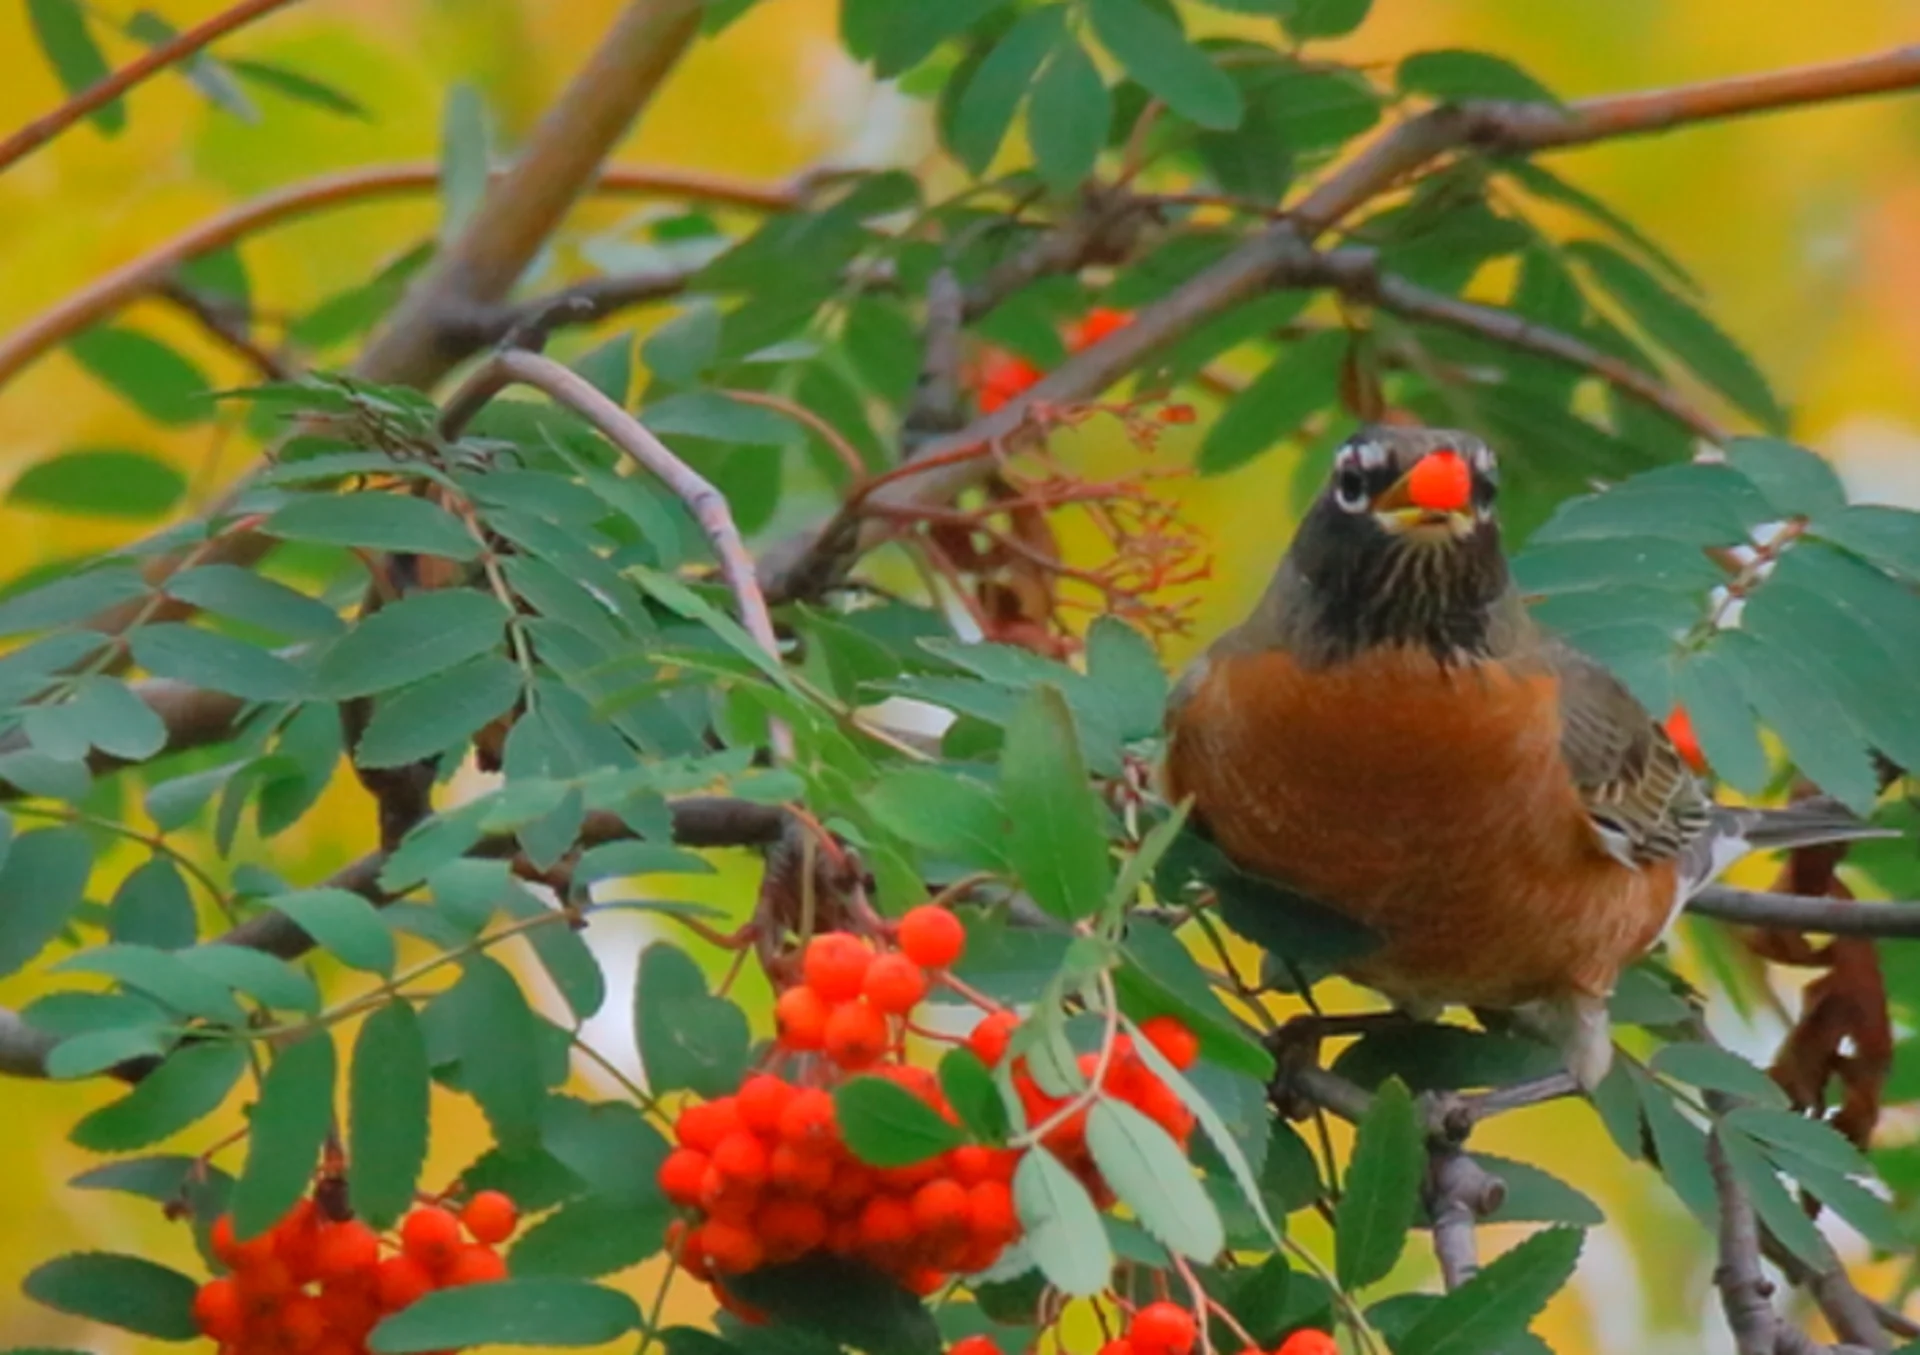 5 facts about robins—spring's unofficial mascot